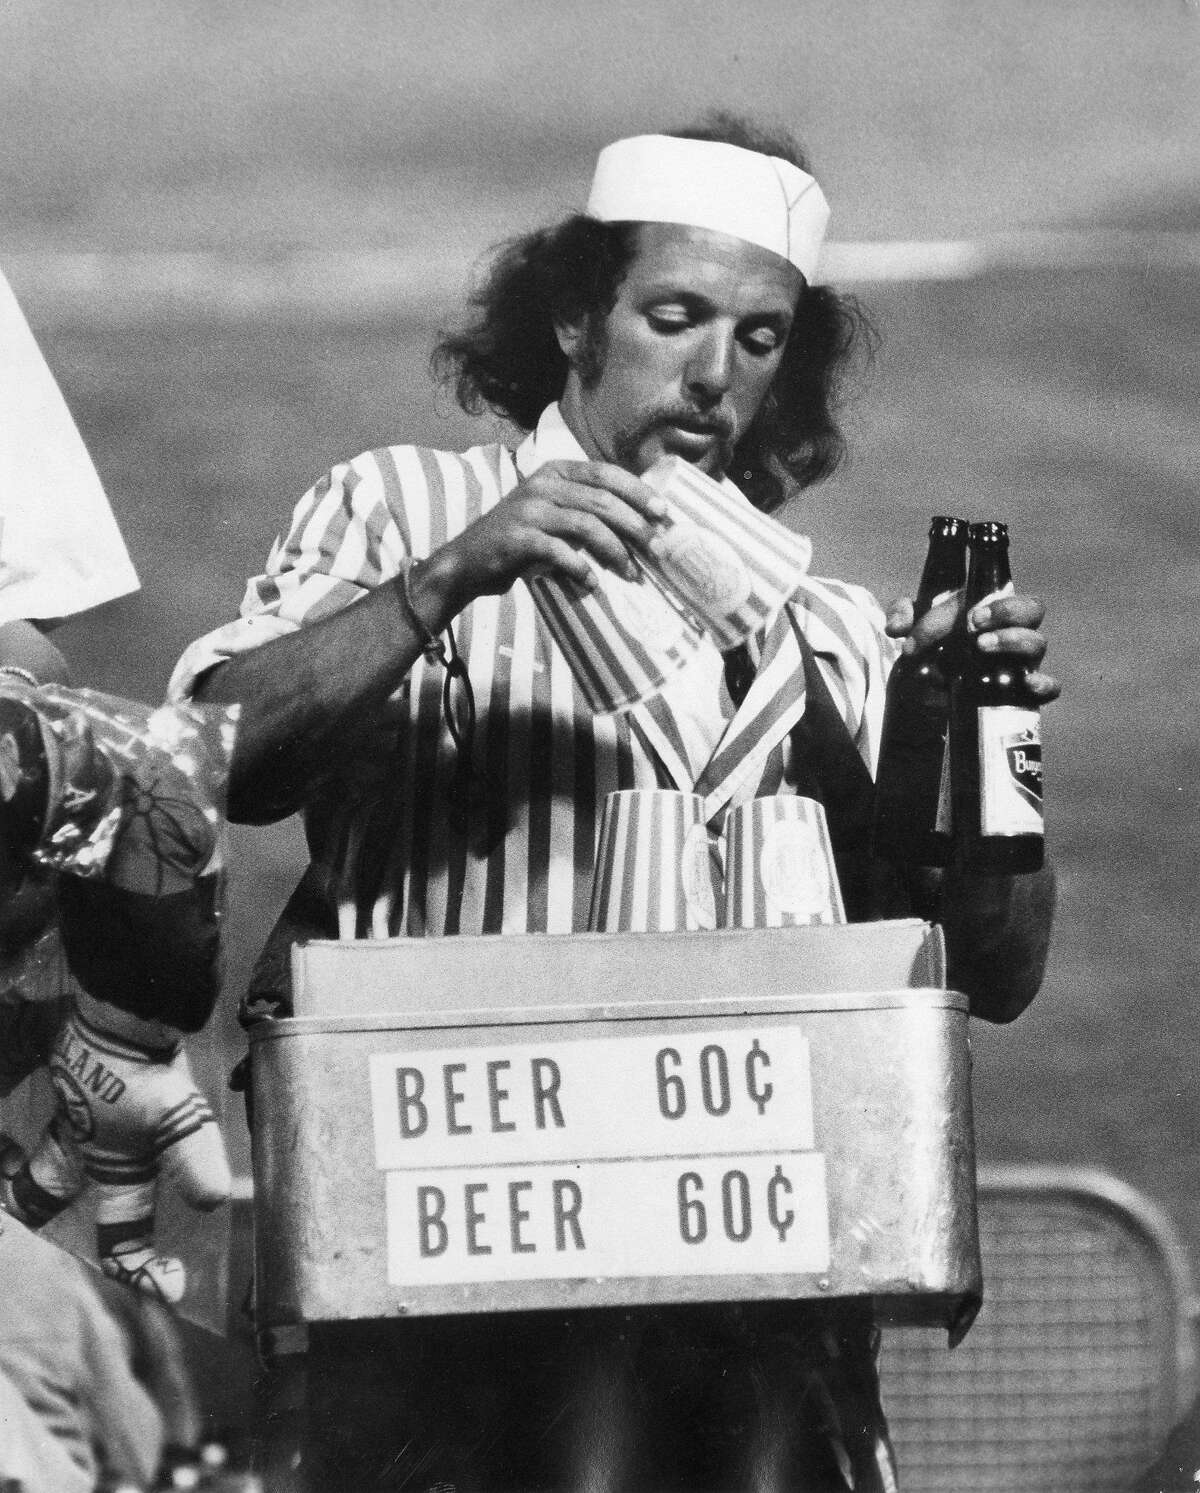 Bob Jacobs sells beer at an A’s game in 1974.